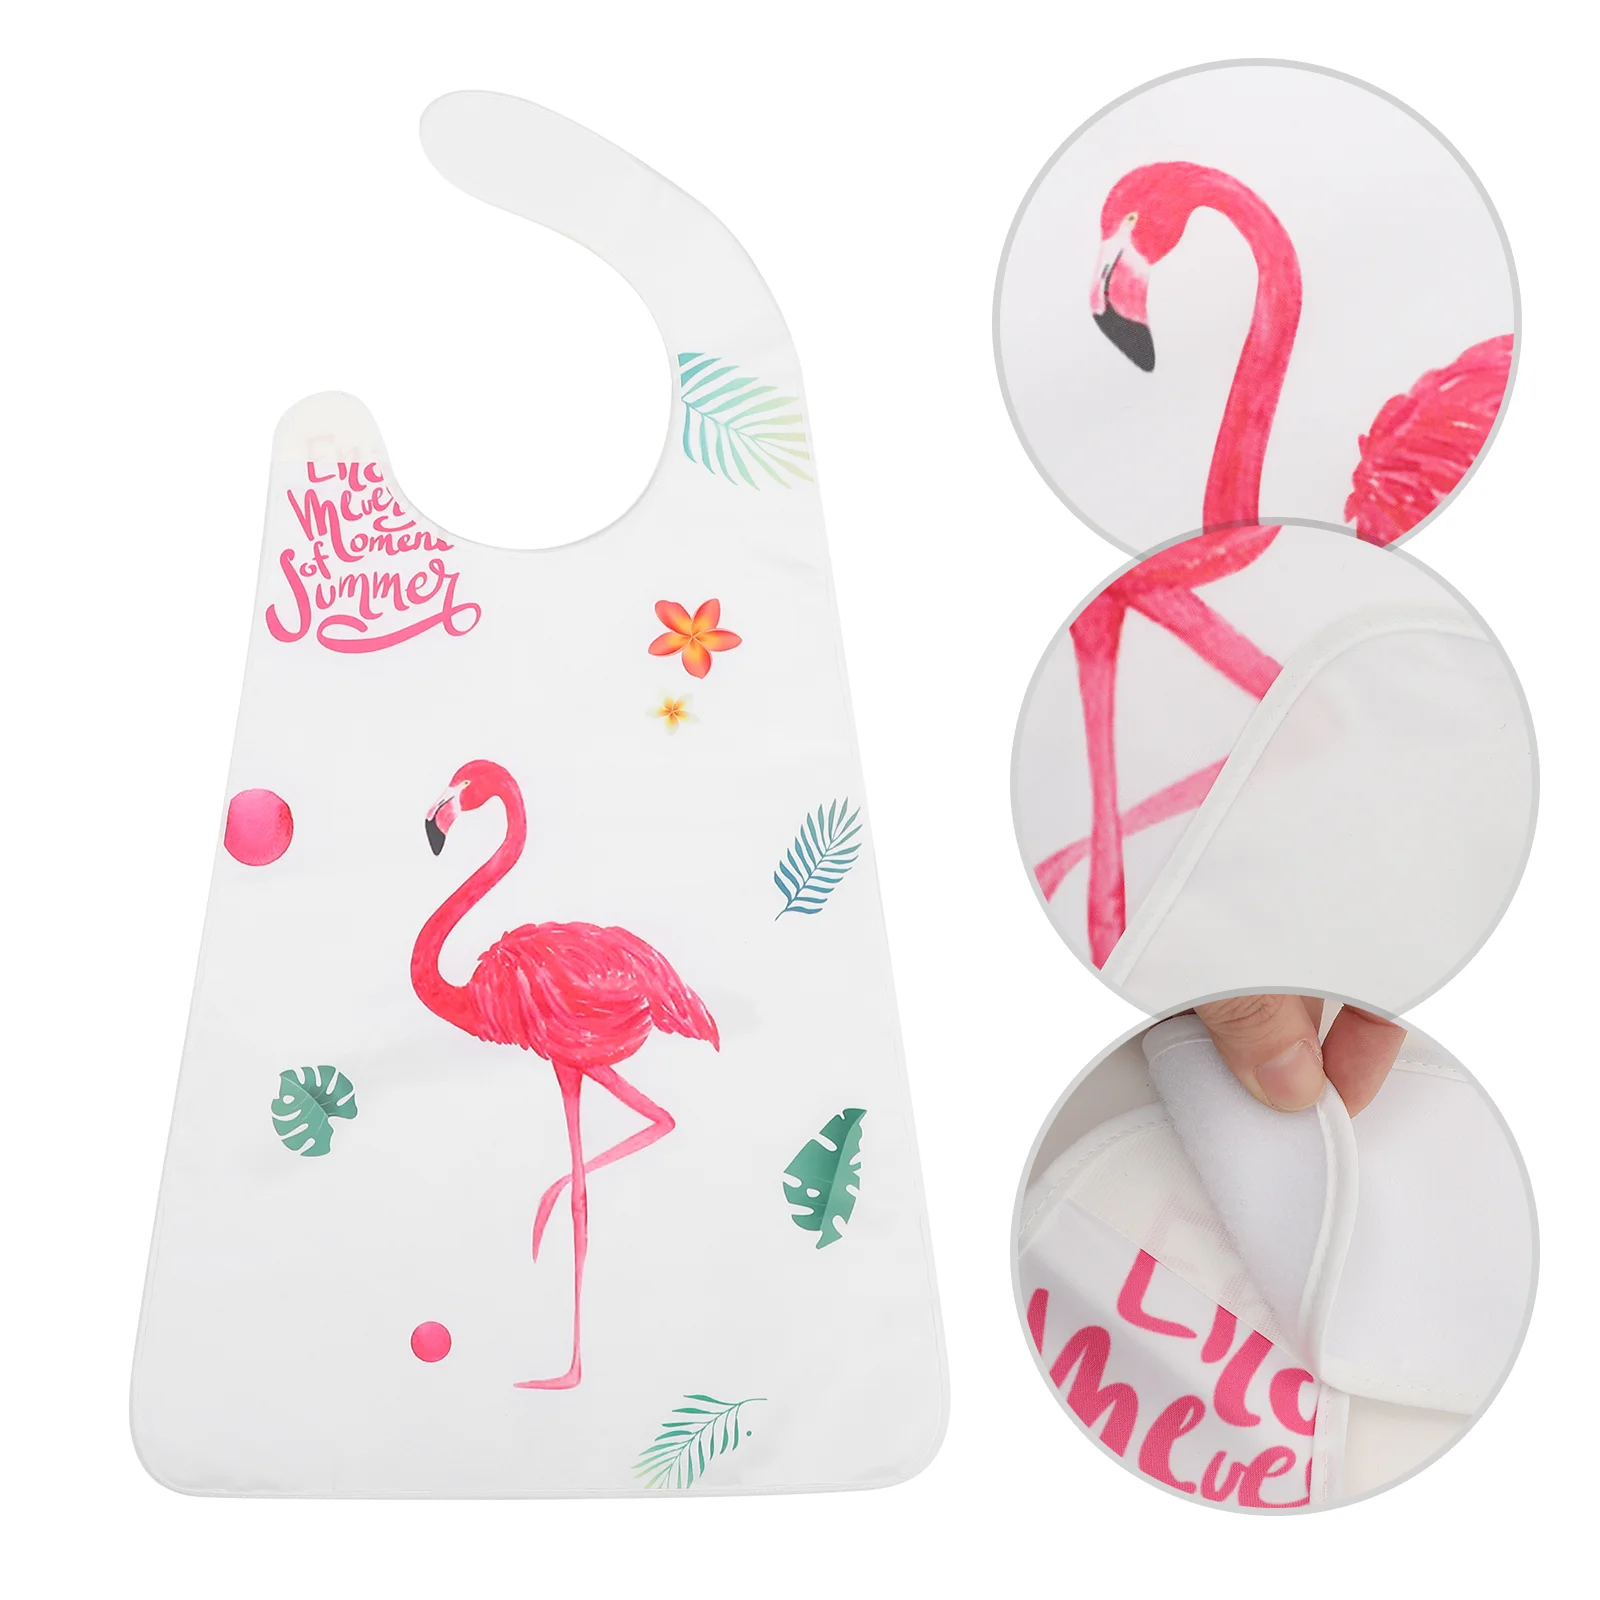 

Bibs Adult Apron Eating Bib Senior Washable Mealtime Protector Elderly Women Adults Cloth Food Waterproof Clothing Rice Patient